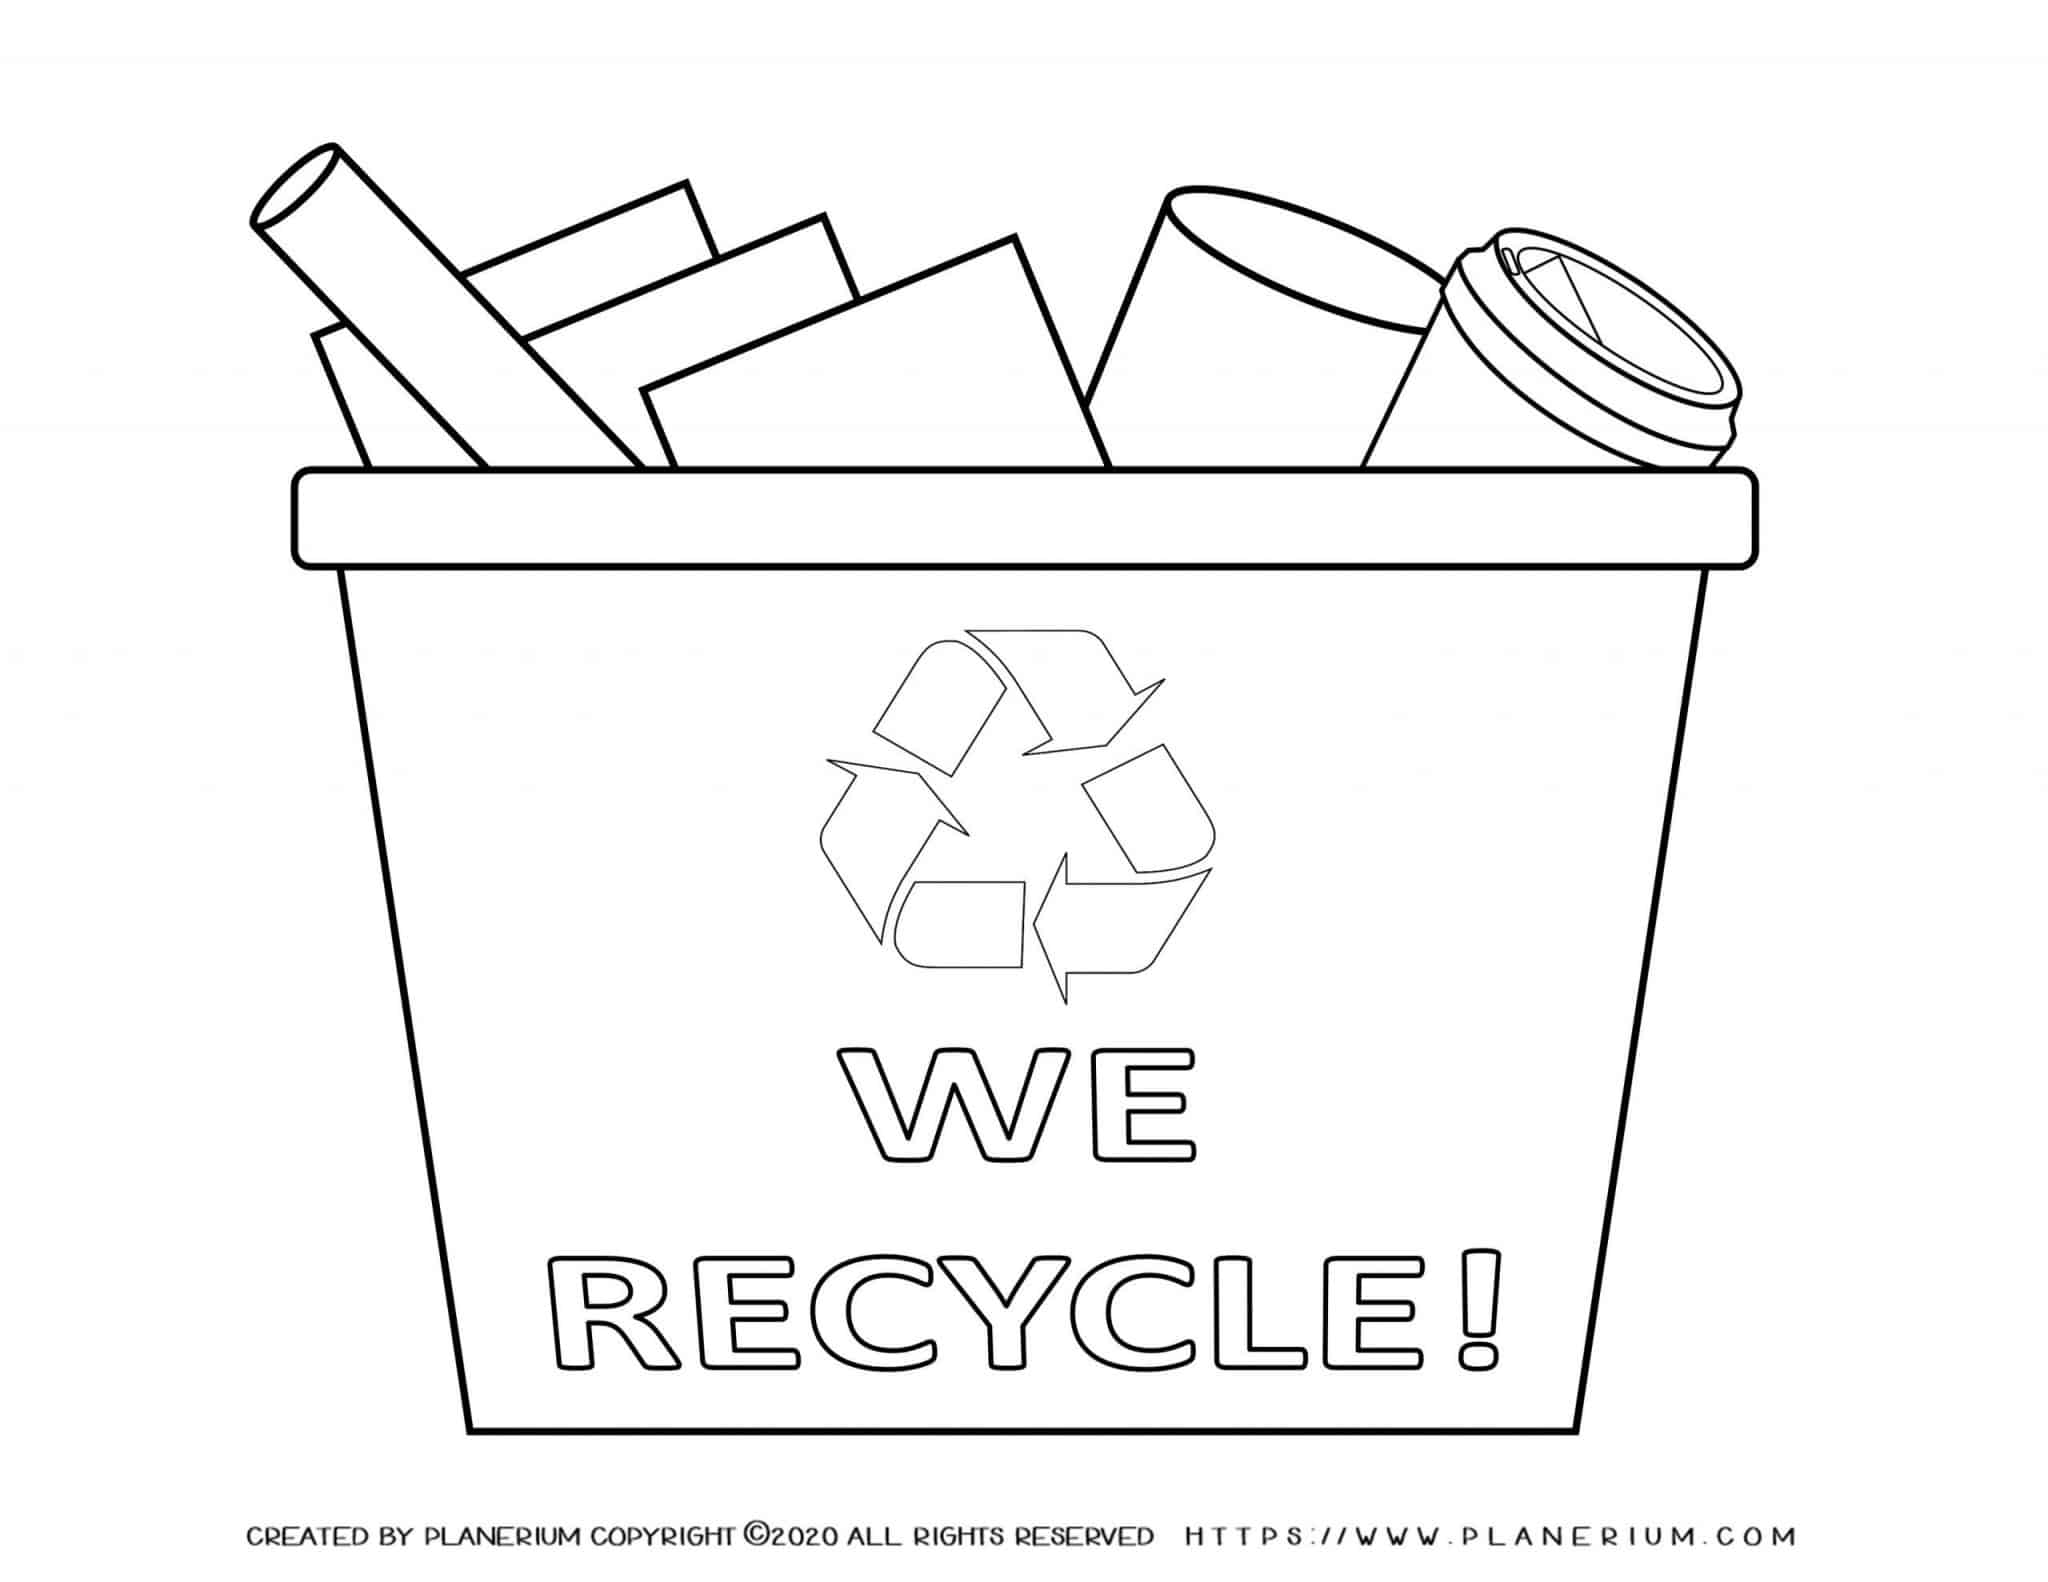 Earth day - Coloring page - We Recycle